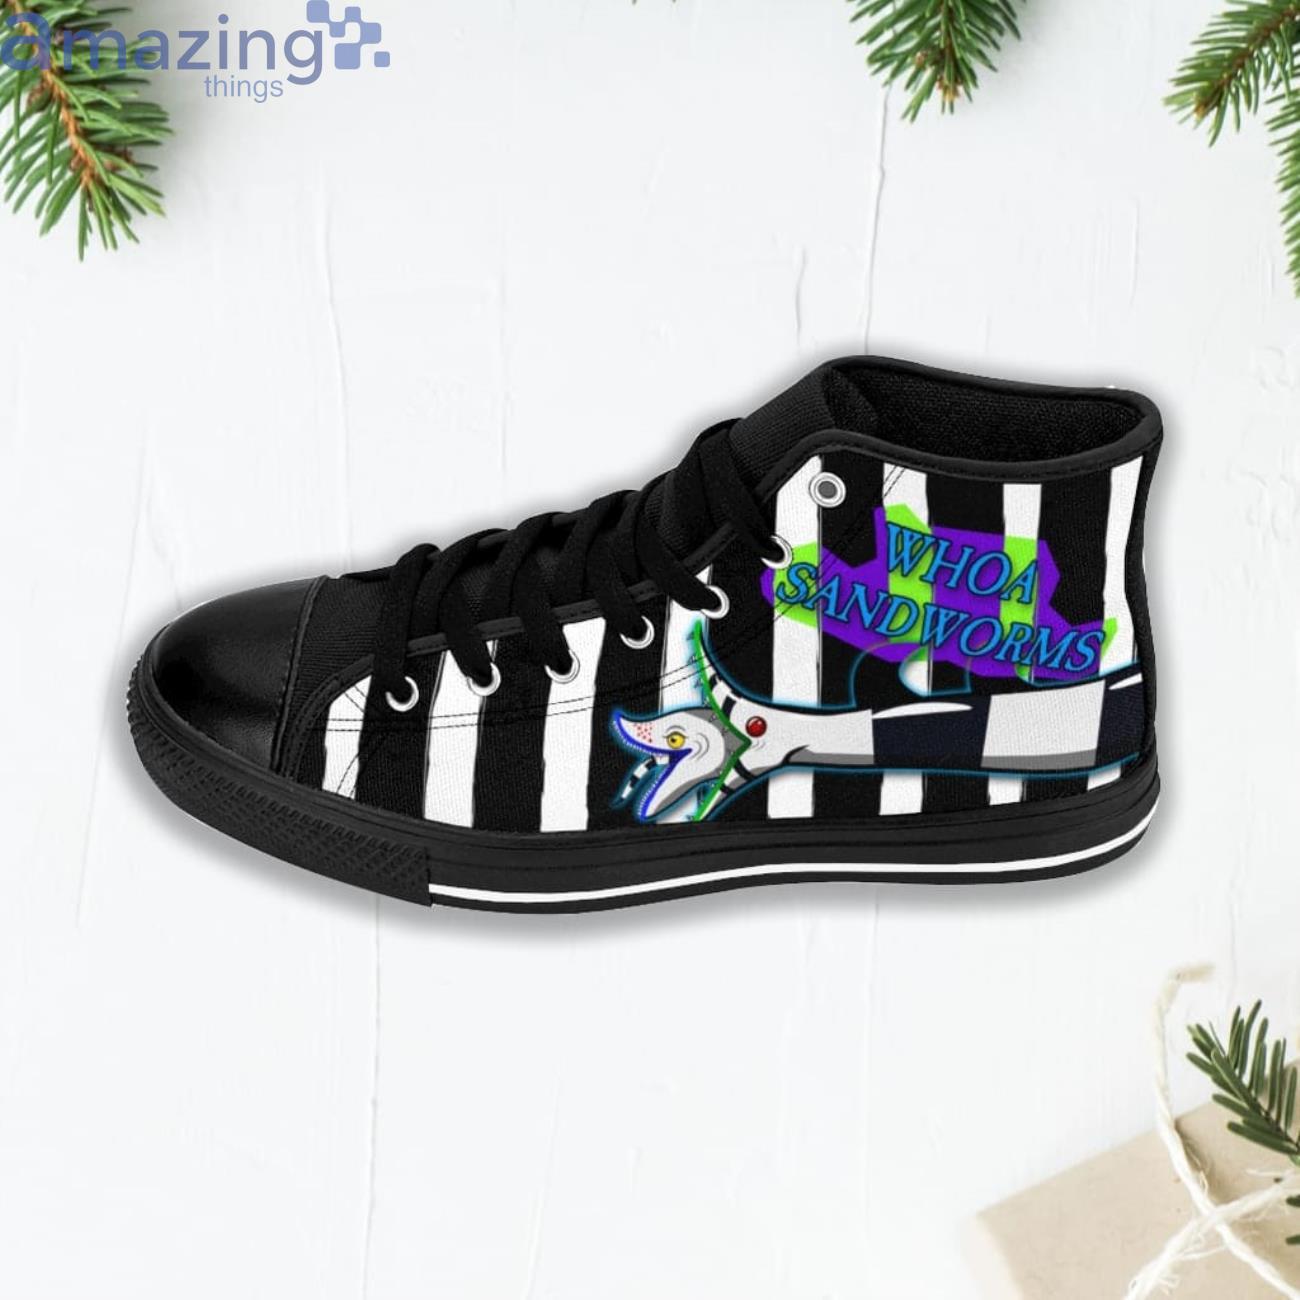 Whoa Sandworms Beetlejuice High Top Shoes Product Photo 3